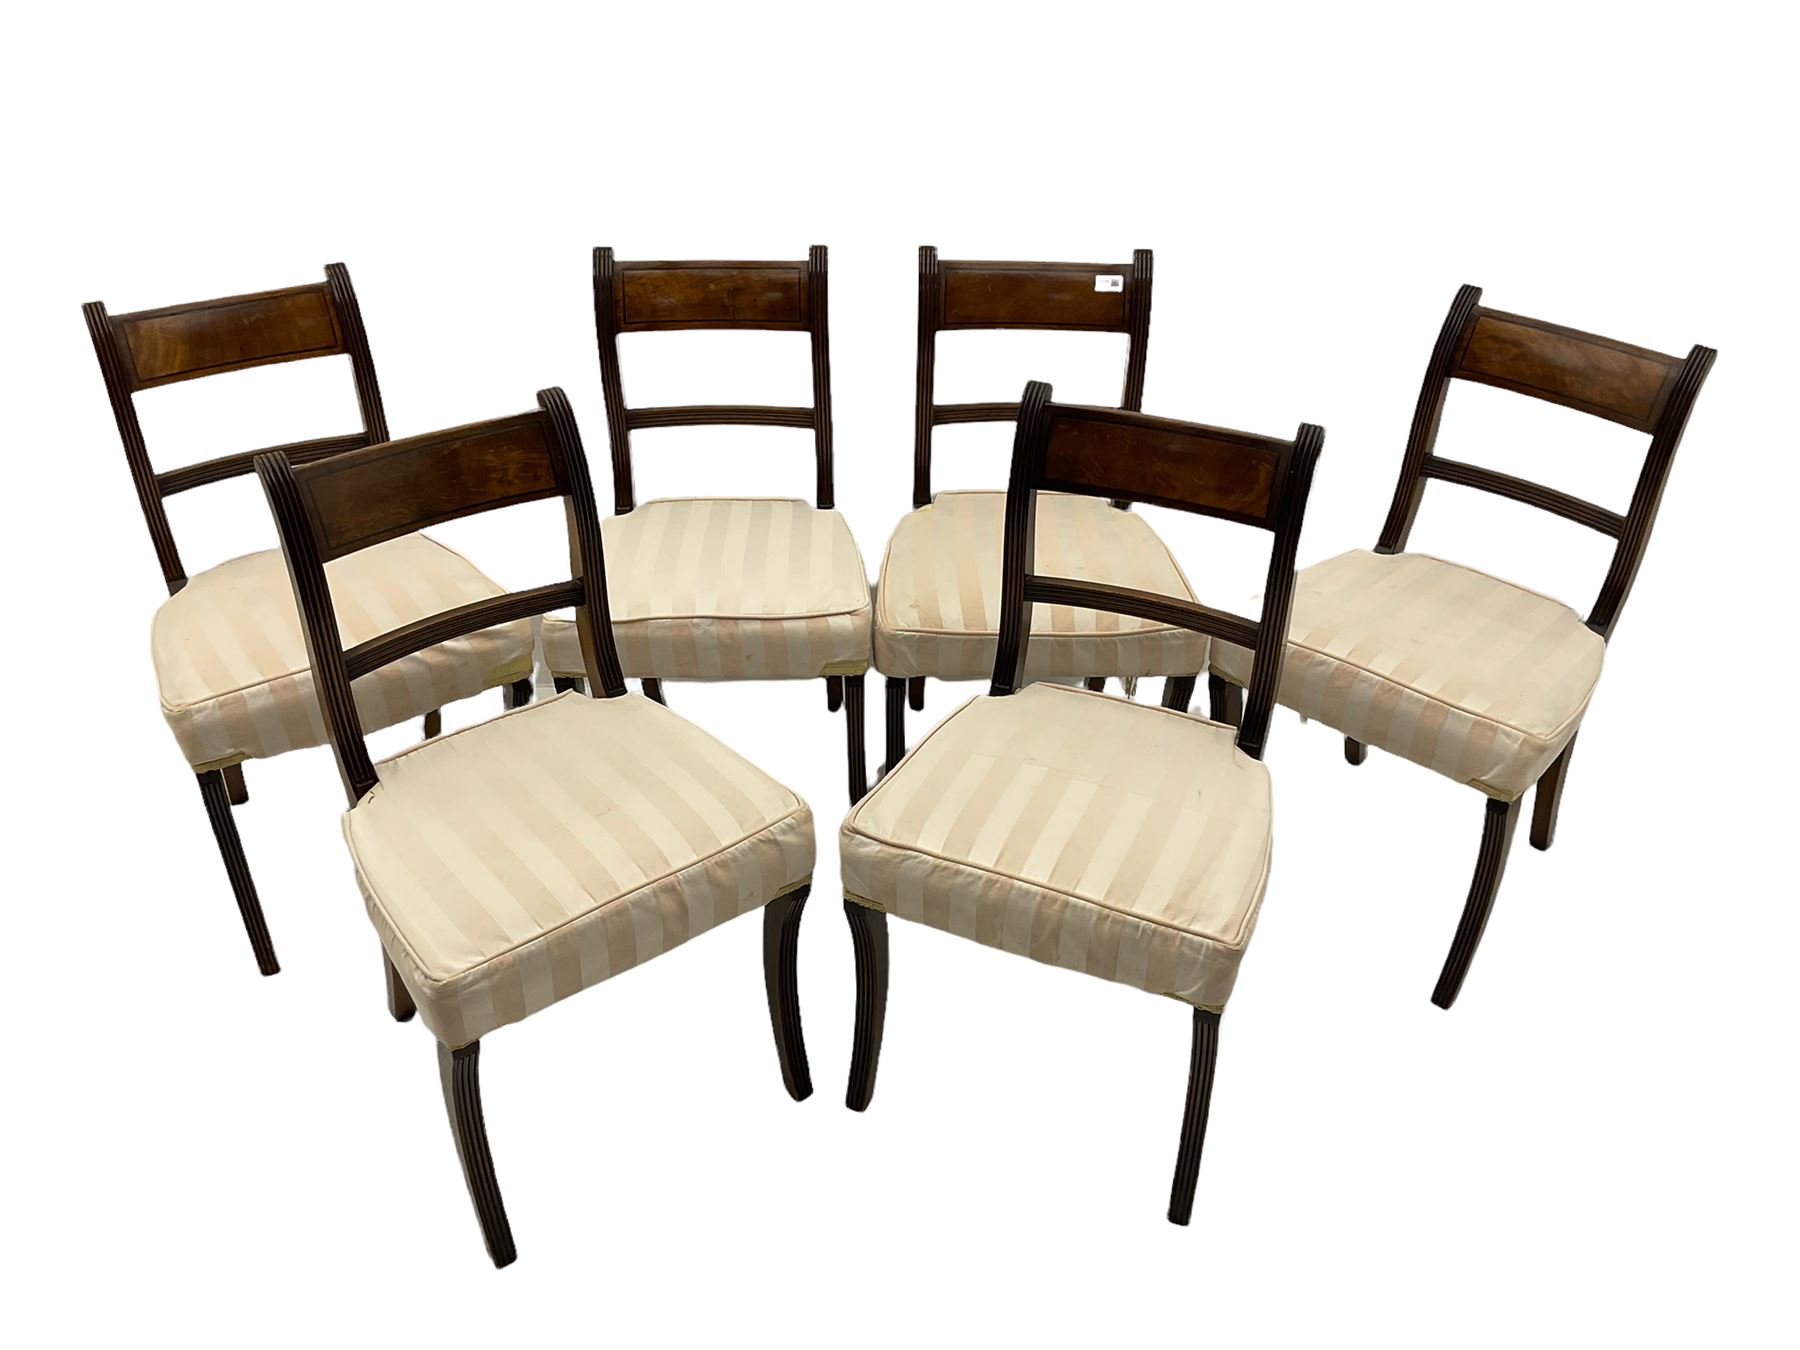 Regency period set six mahogany dining chairs - Image 2 of 5